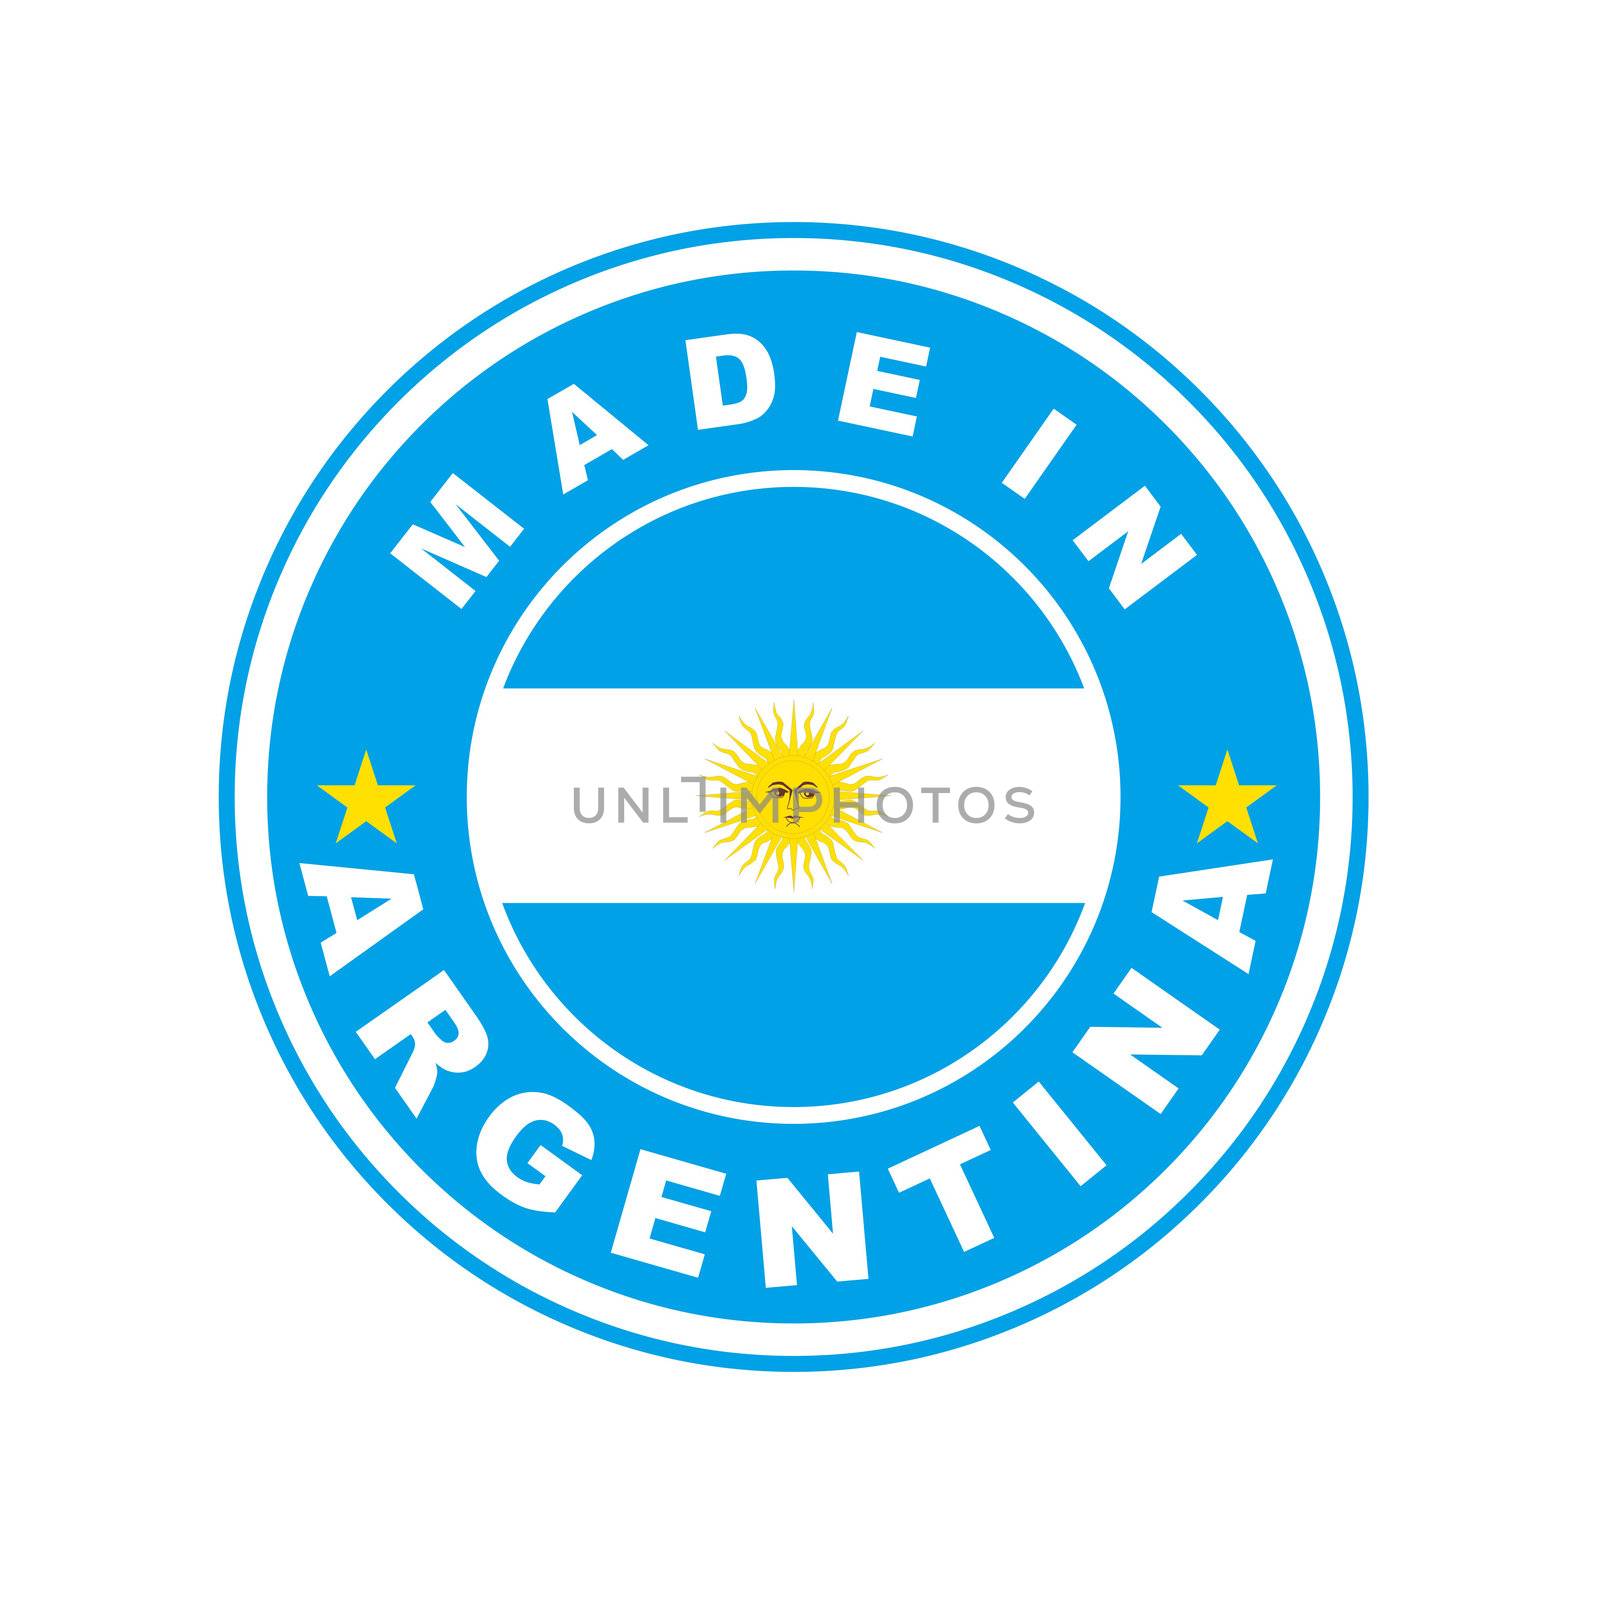 made in argentina by tony4urban